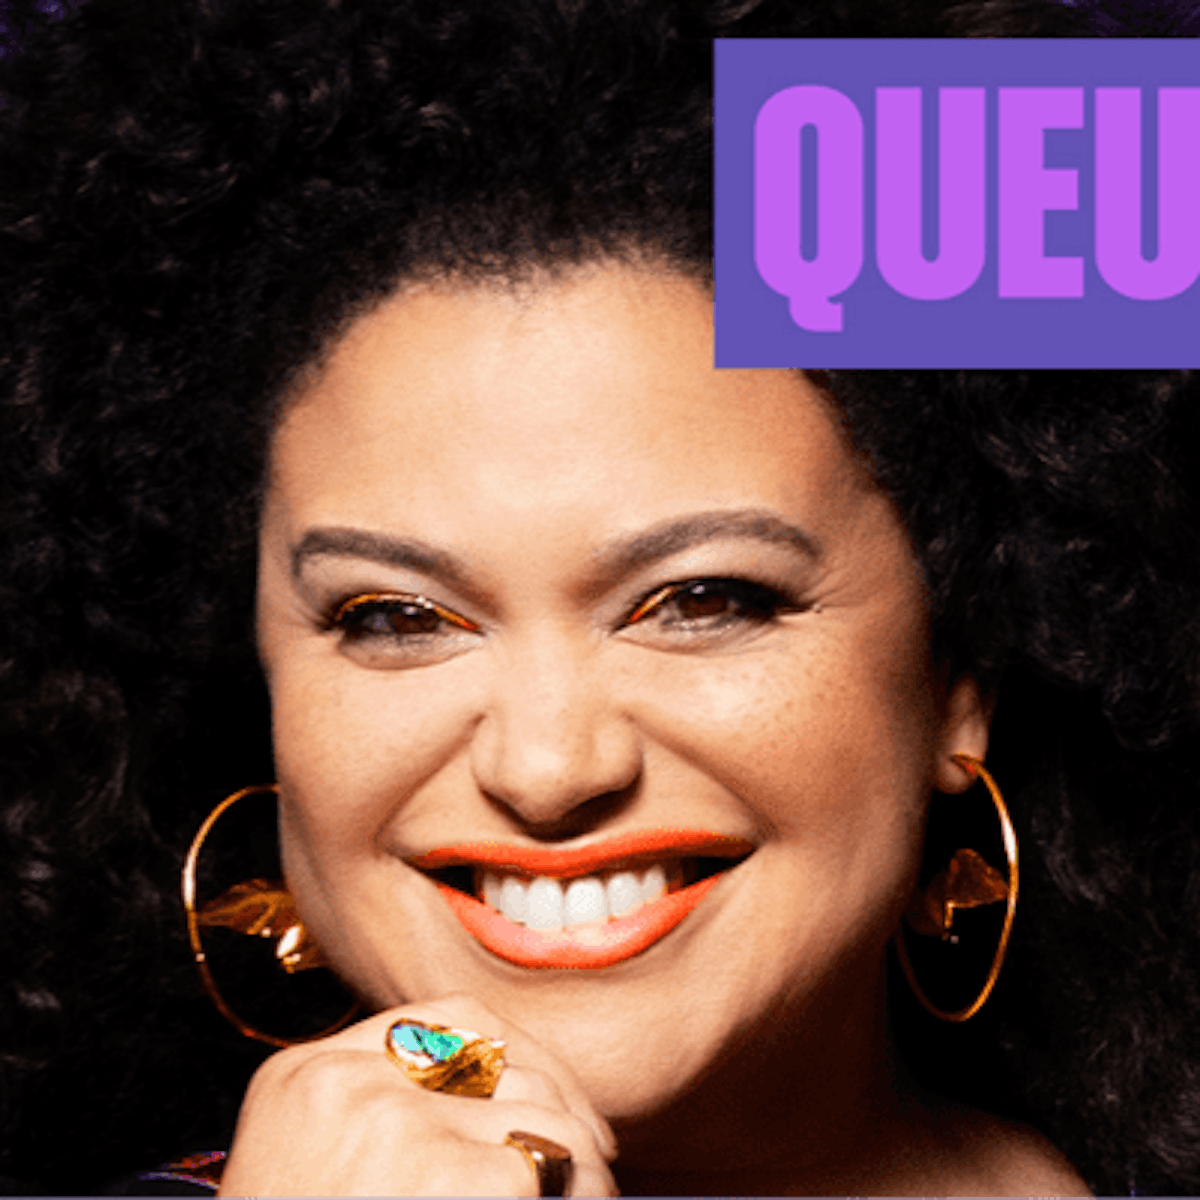 Michelle Buteau wears a striped dress, rests her chin on her hand, and looks directly at the camera. The background is purple and there is a dark purple box with Queue & A in light purple.